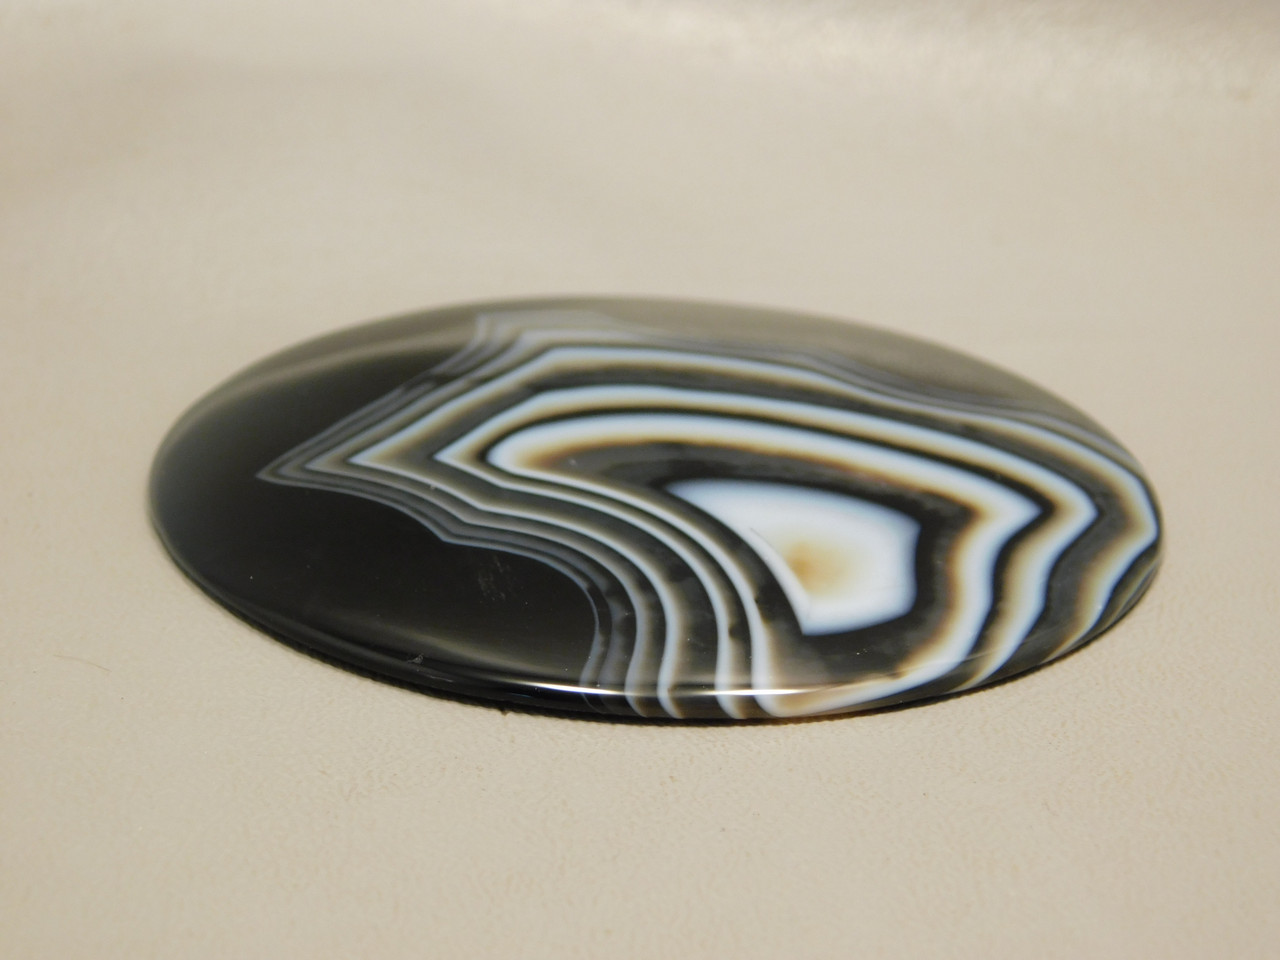 Tuxedo Agate Large Collector Cabochon 78 mm 3 inch Stone #xl3